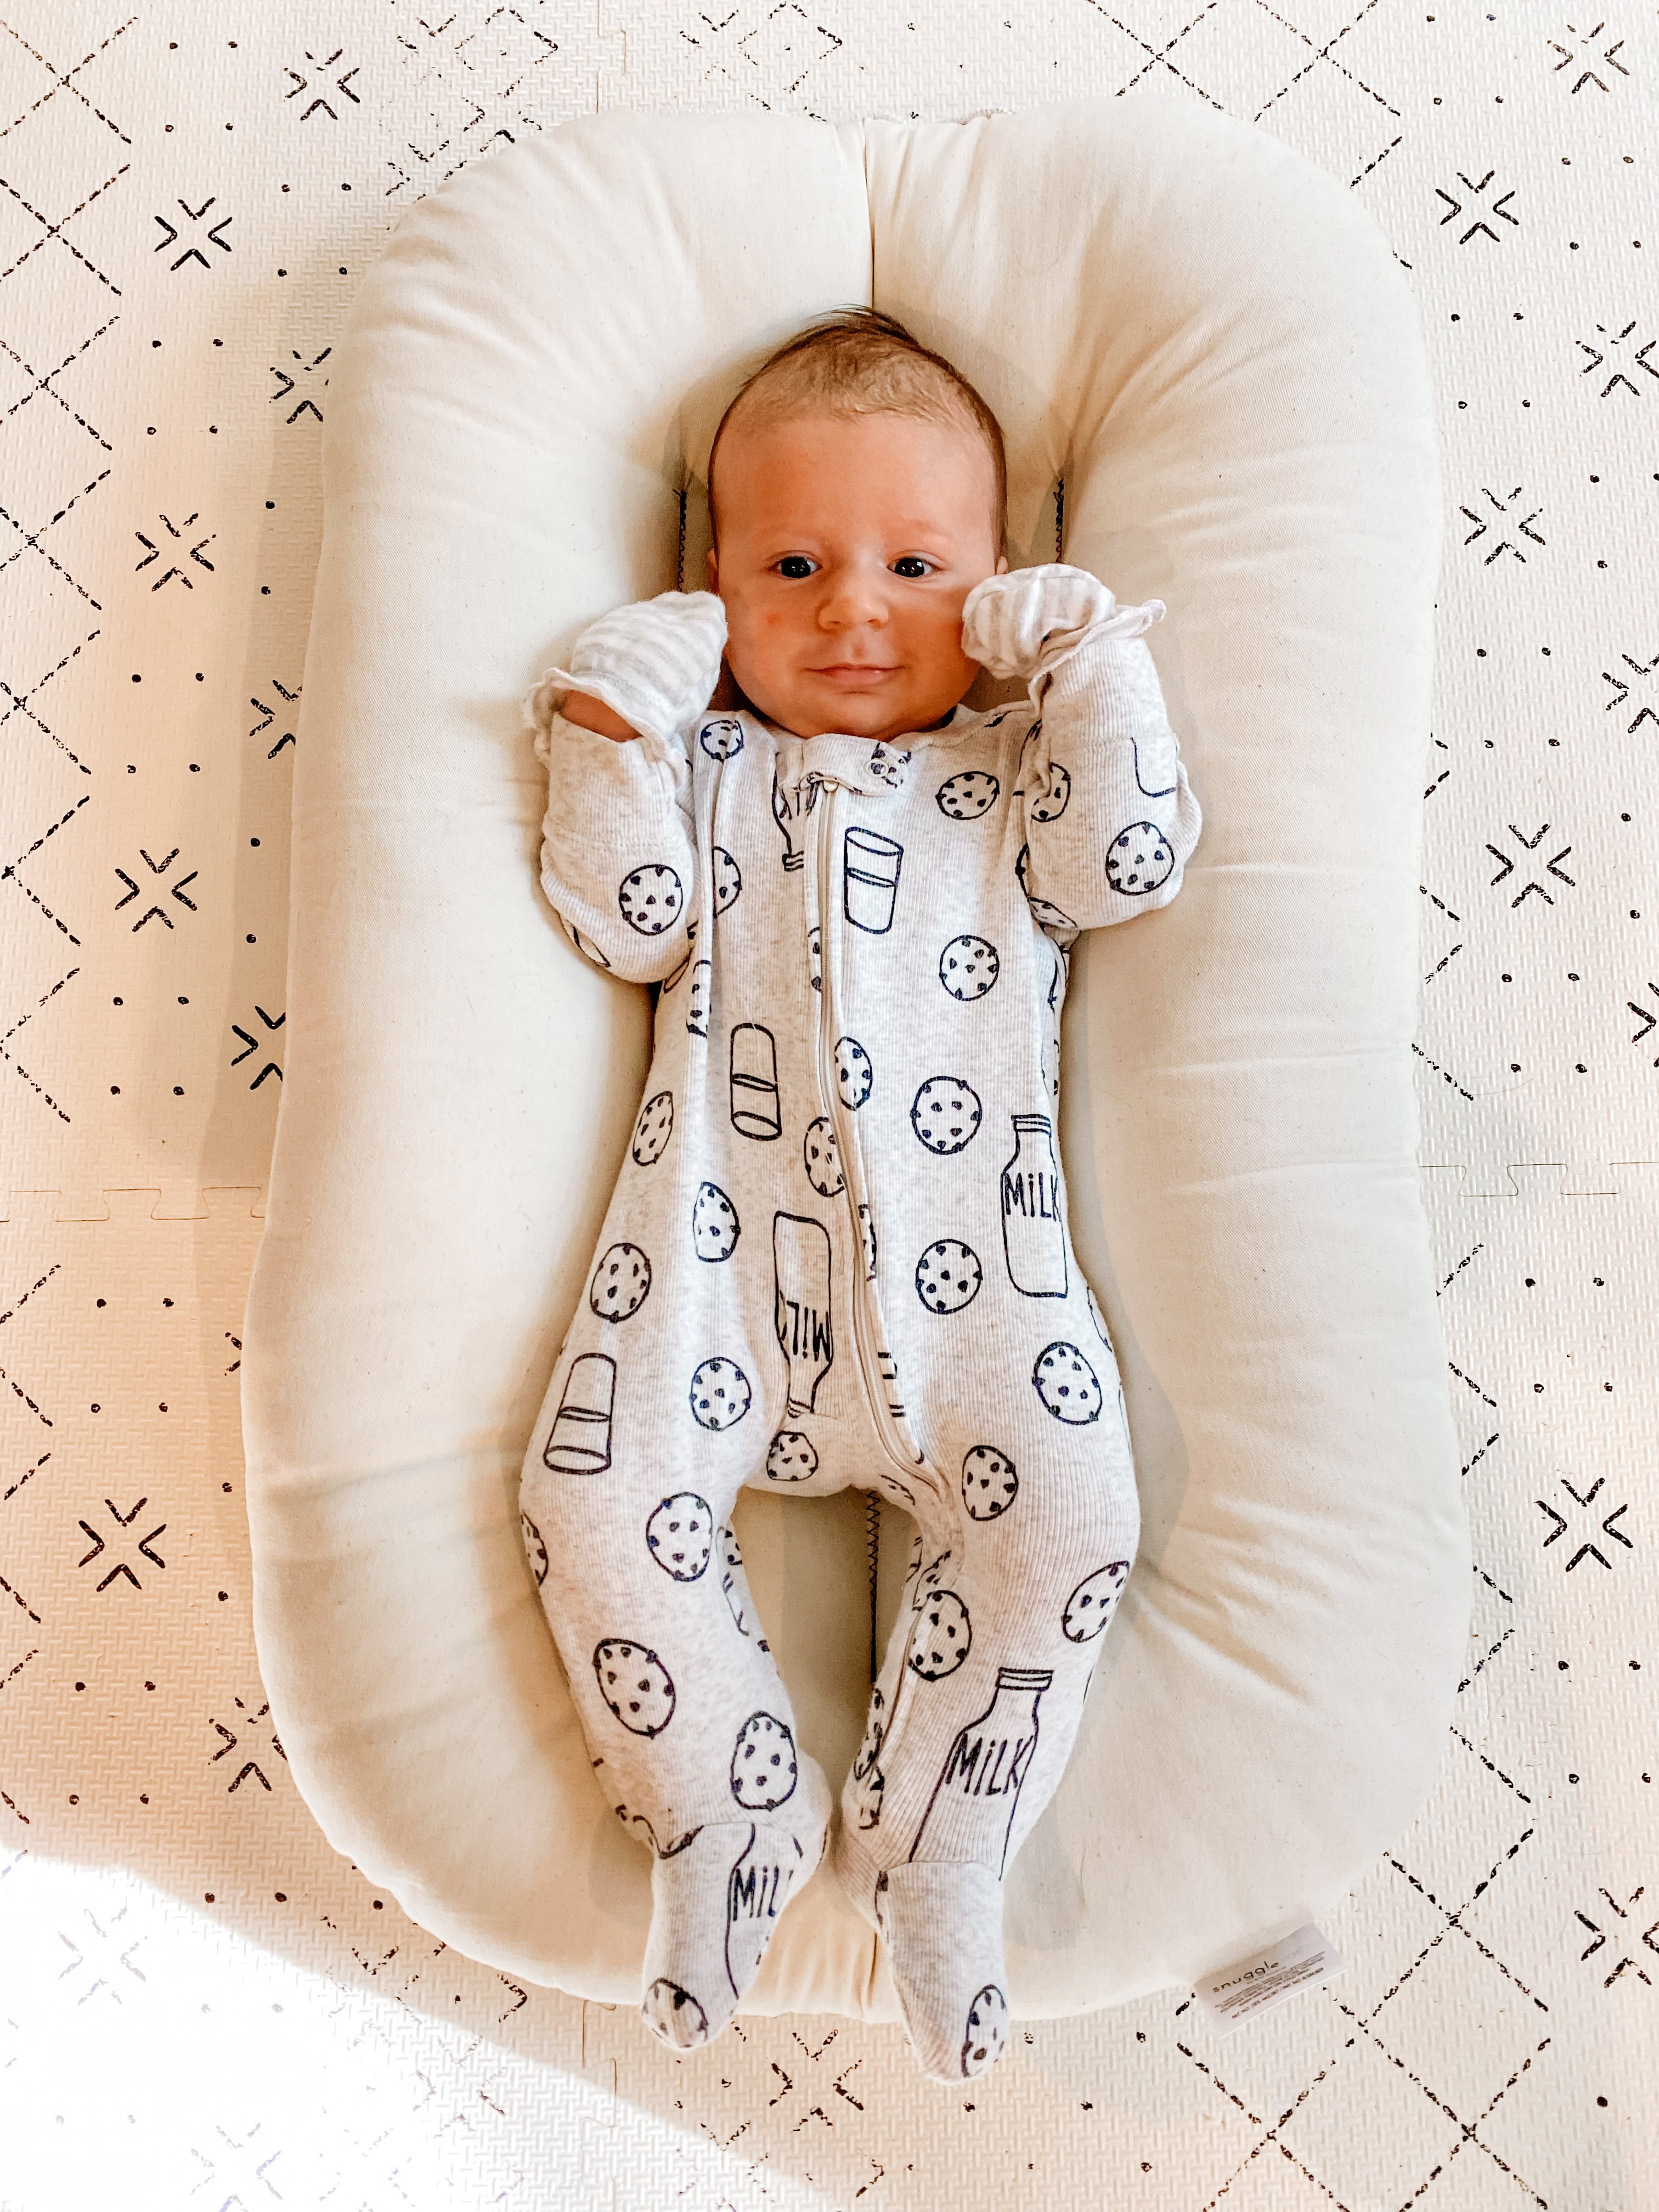 baby wearing footed pajamas from carter's (milk & cookies print)